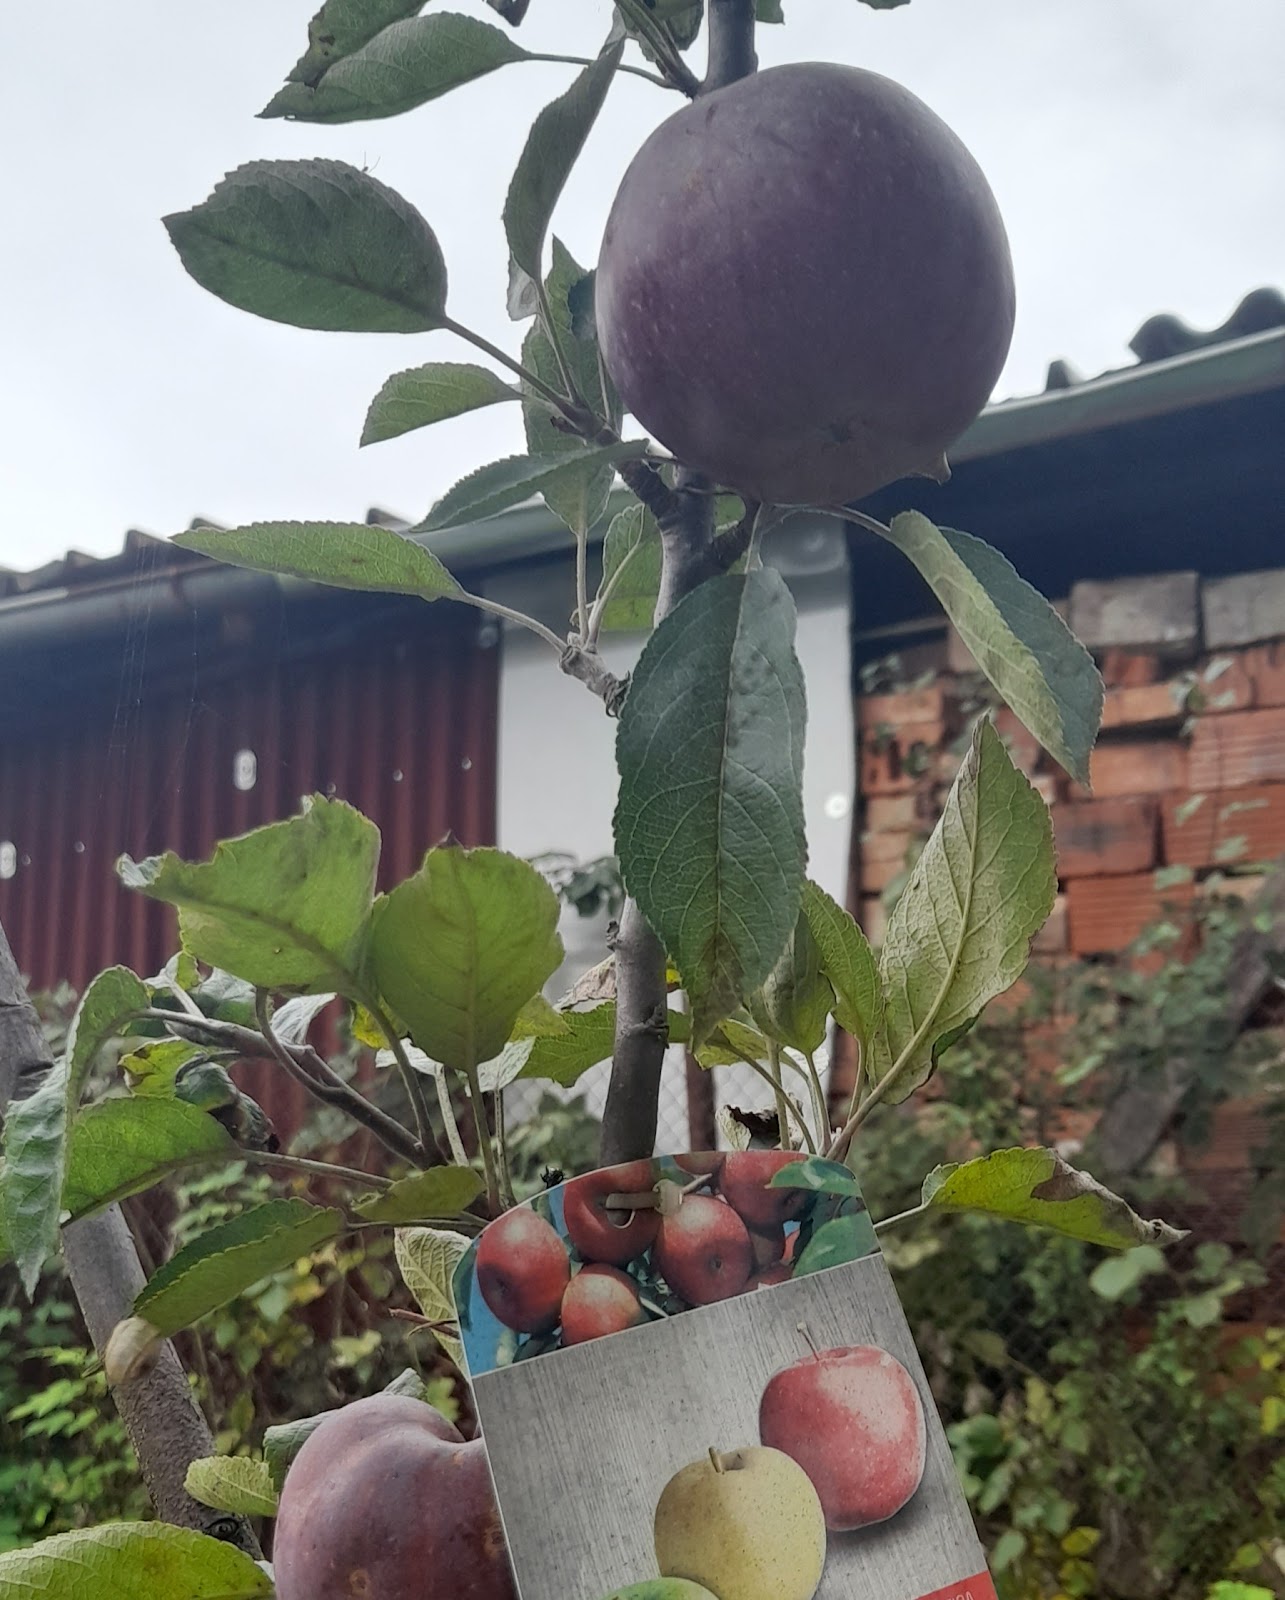 Young apple tree with apples.